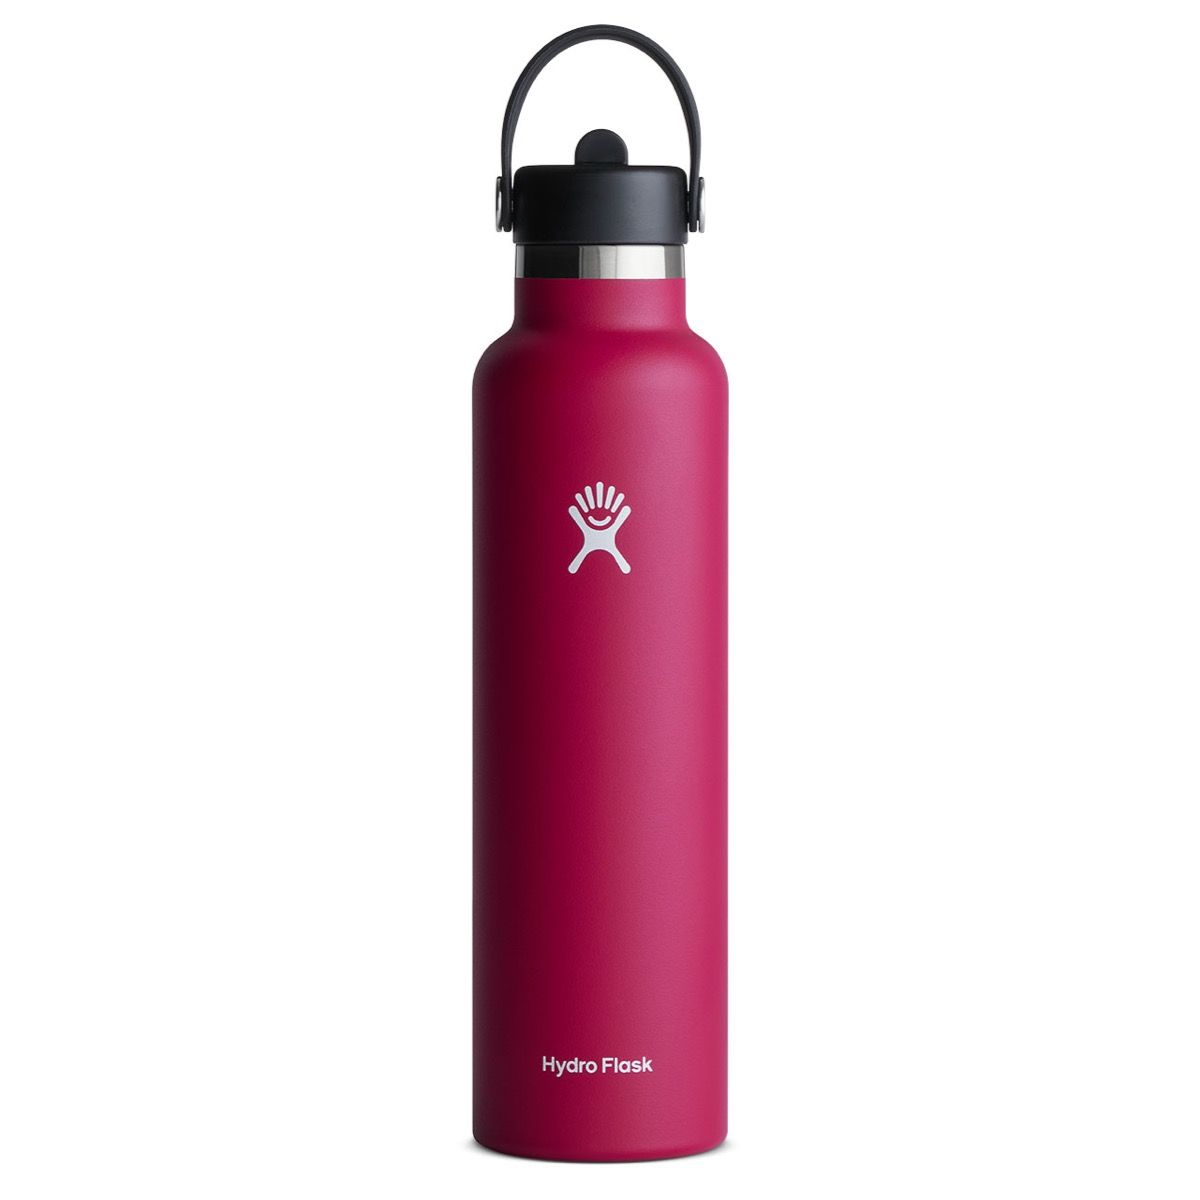 Hydroflask Standard Mouth with Flex Straw Cap 21 oz - Snapper